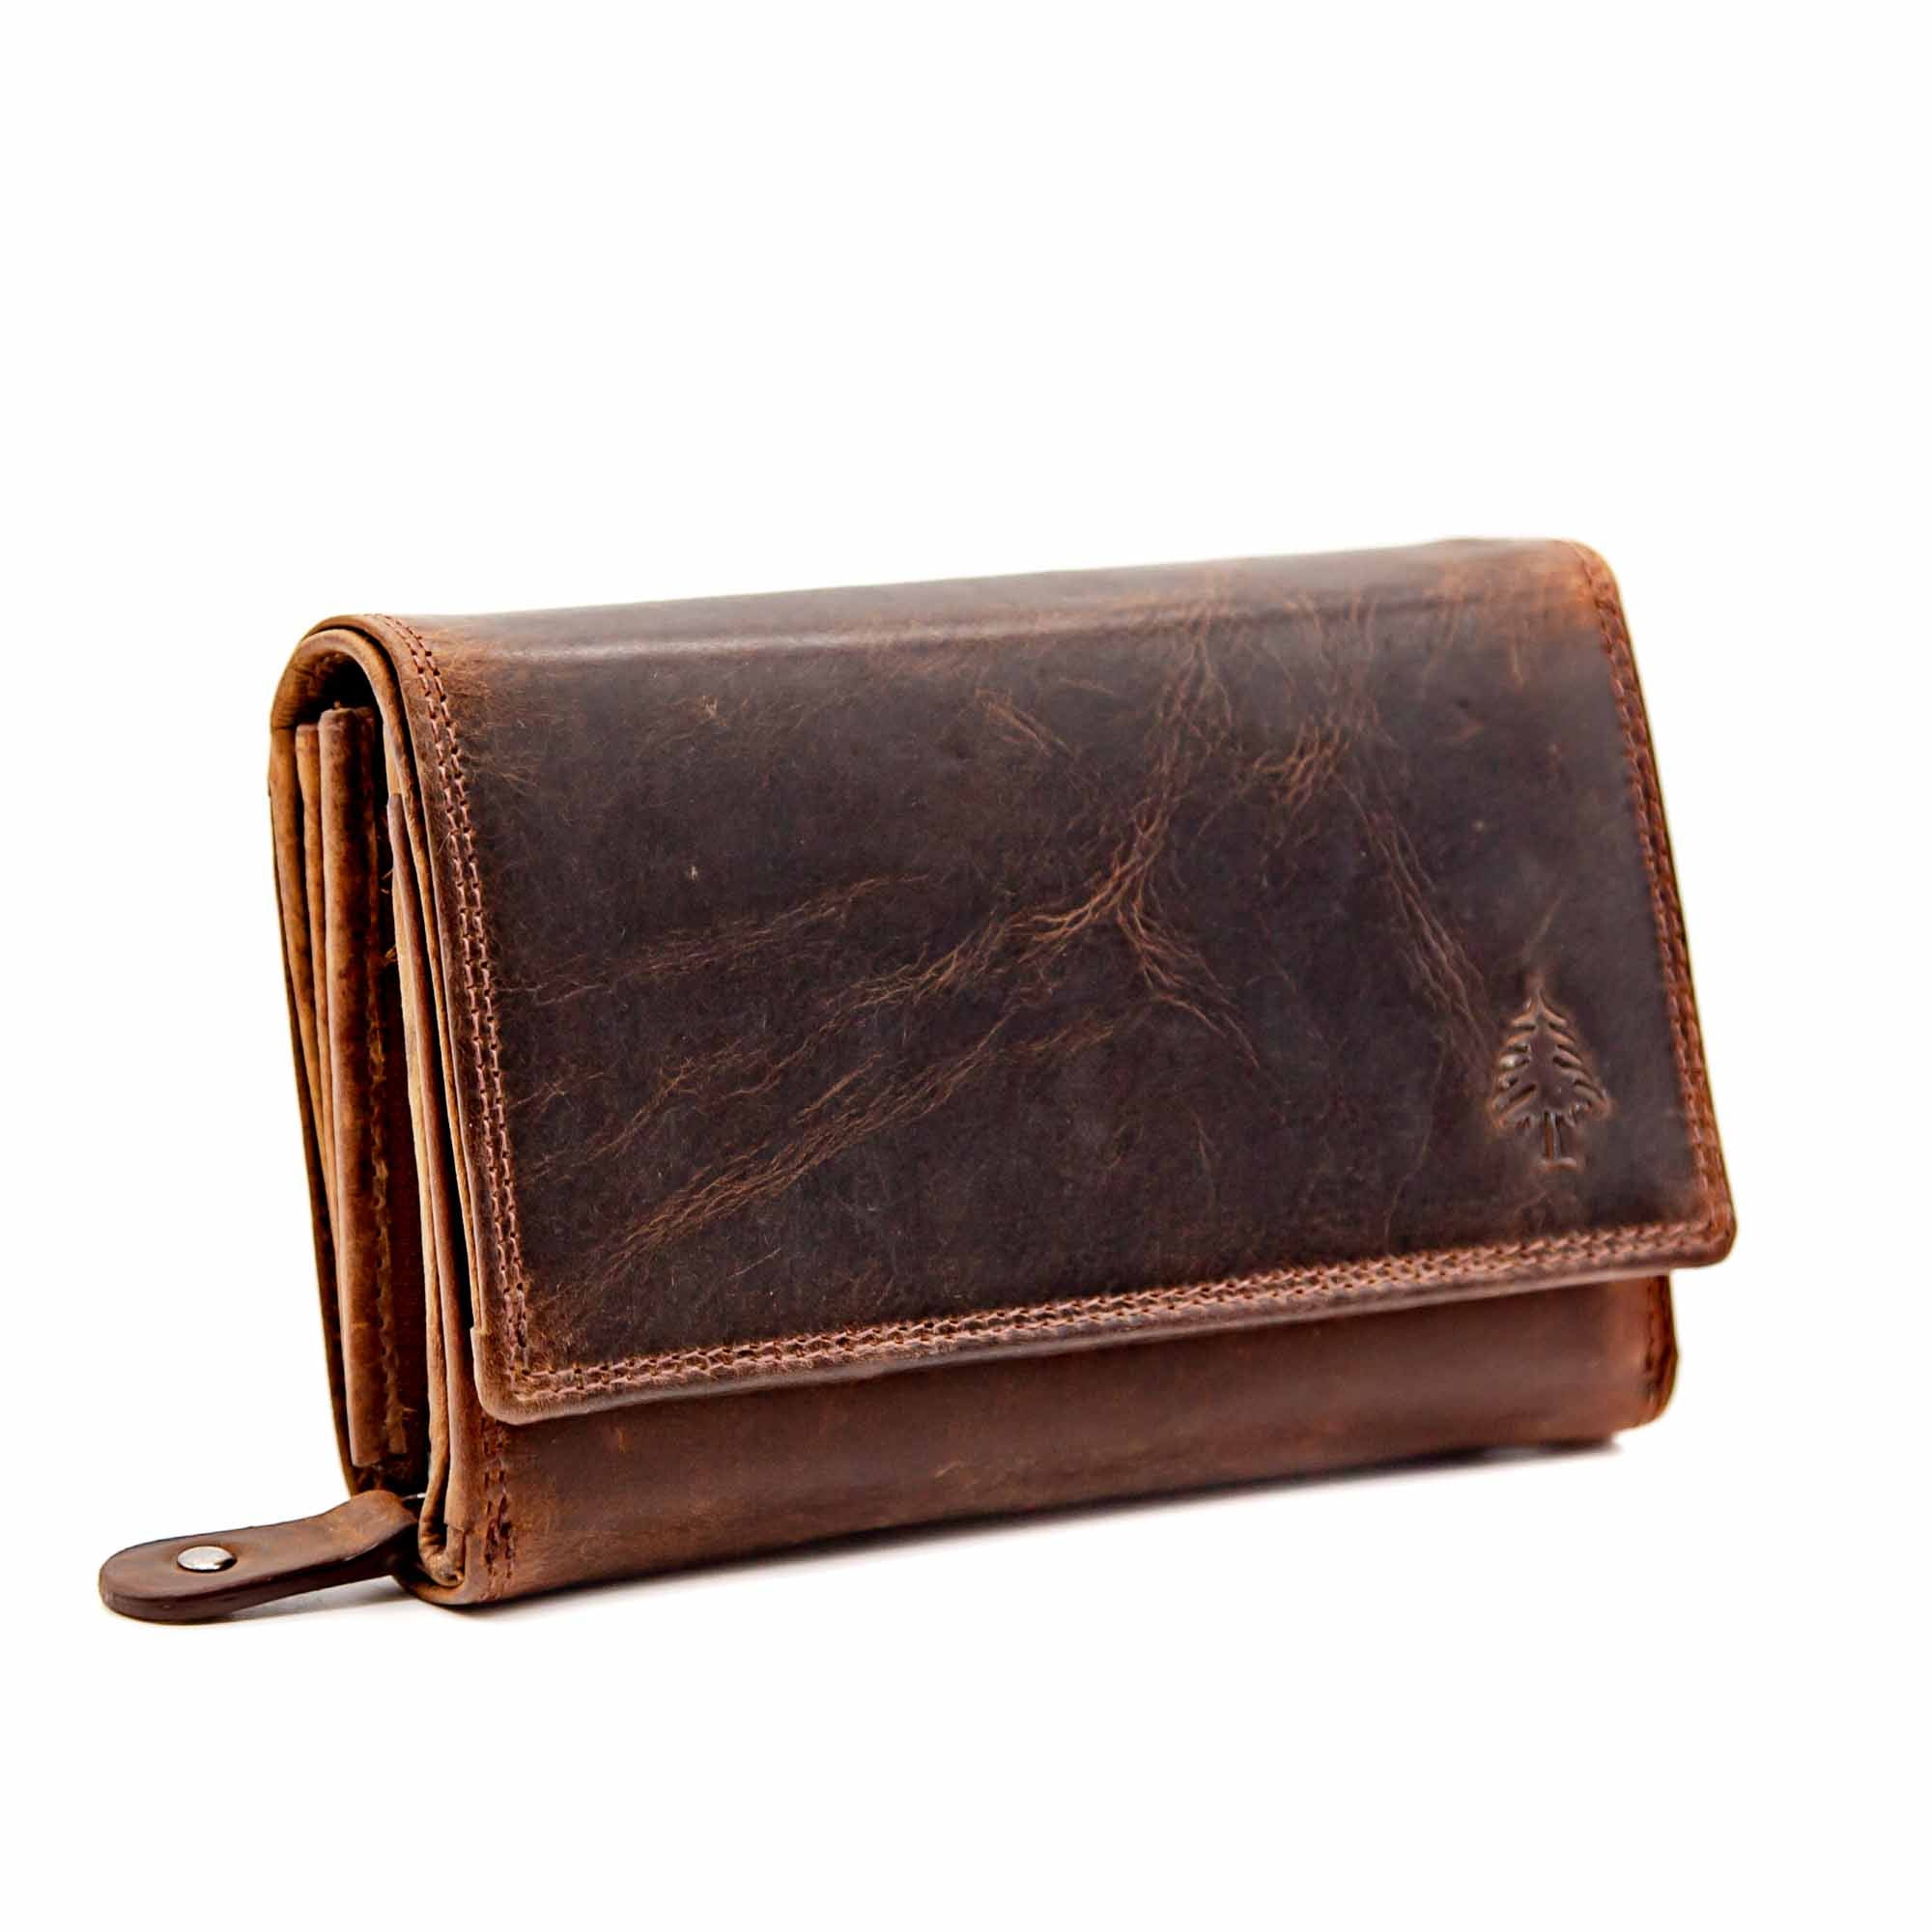 Ann Leather RFID Wallet - Mortise And Tenon